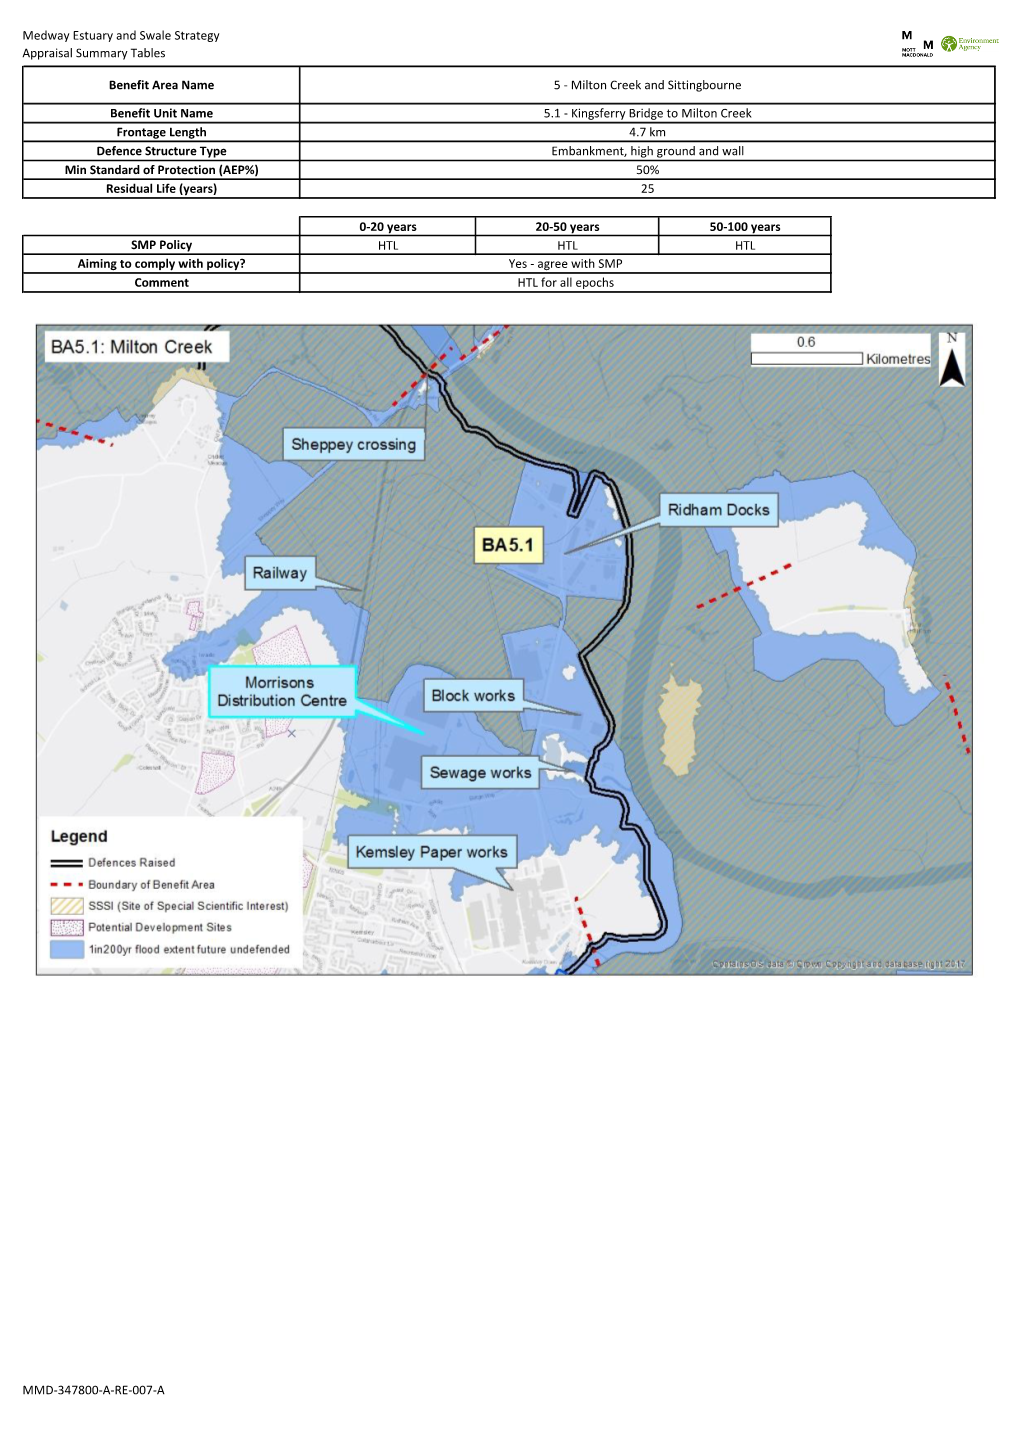 Medway Estuary and Swale Strategy Appraisal Summary Tables 0-20